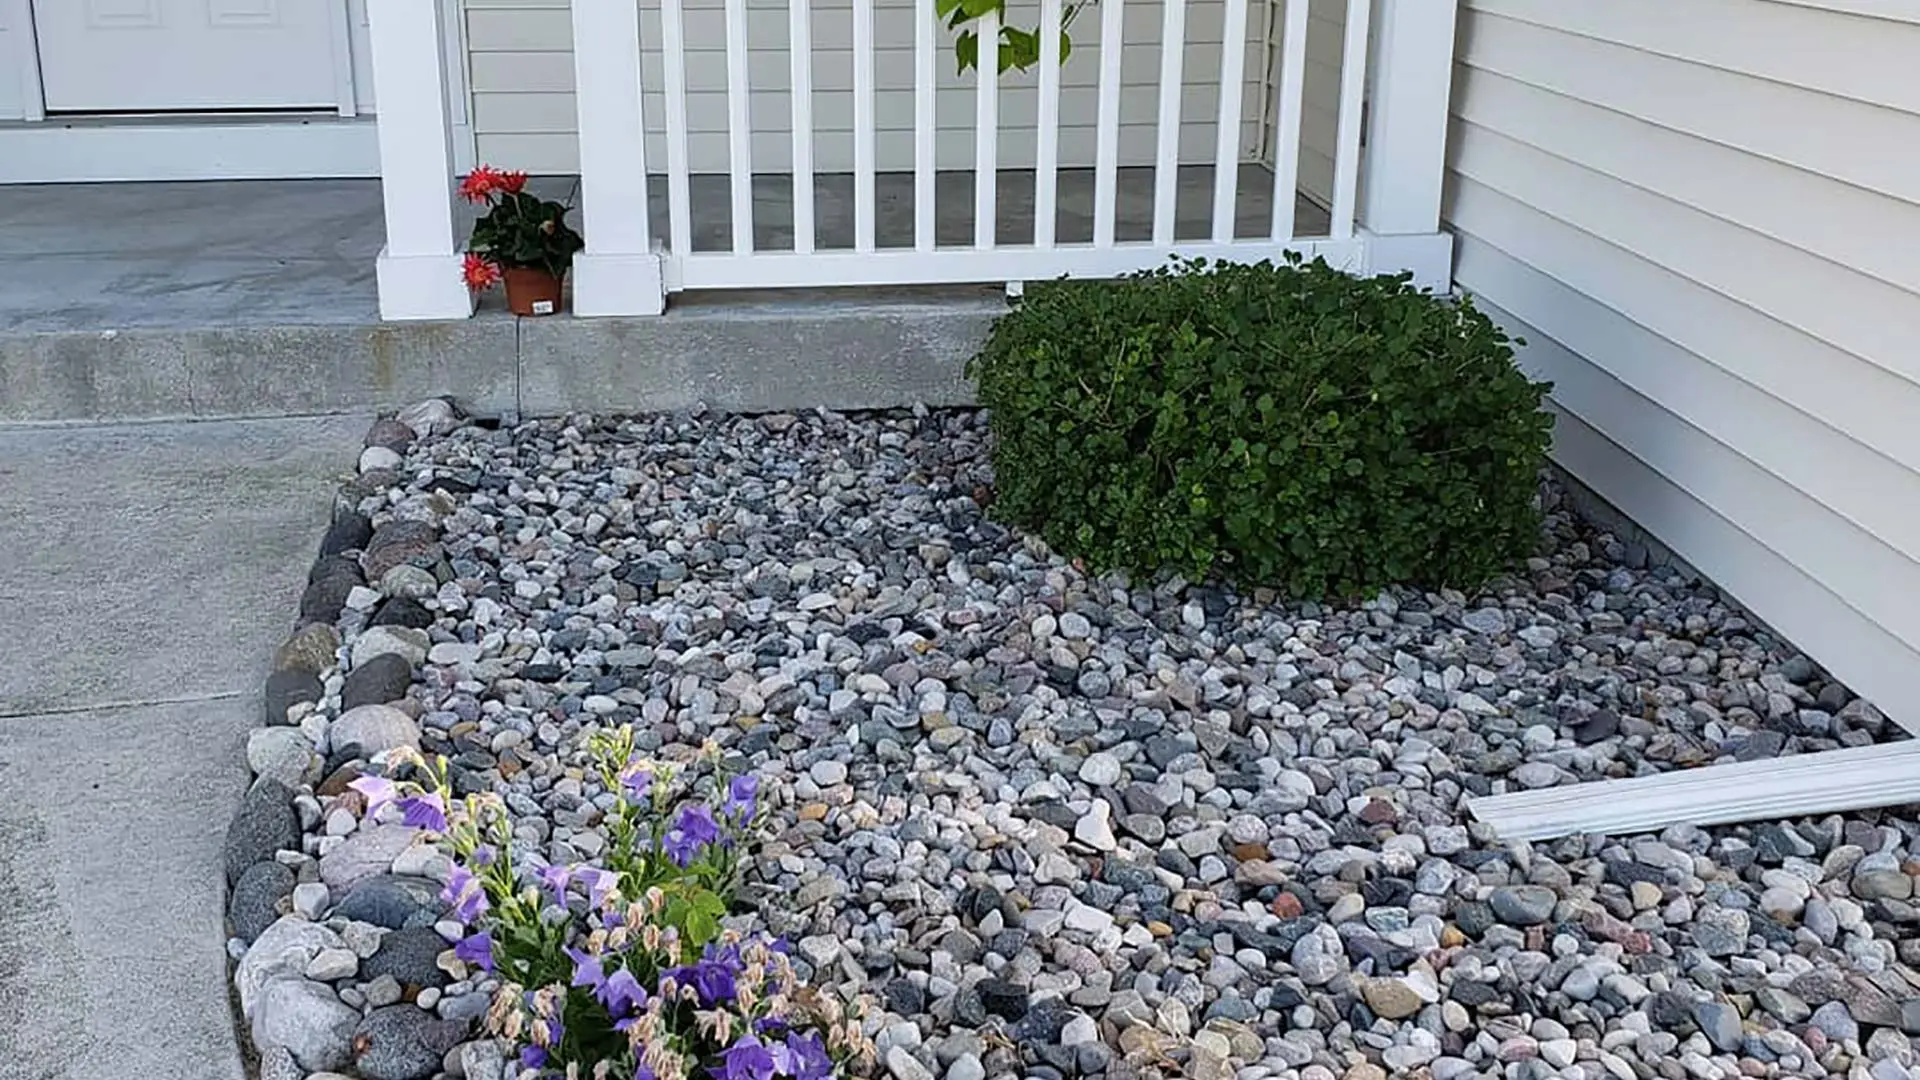 Decorative river rock has been installed in this landscape bed in Saginaw, MI.